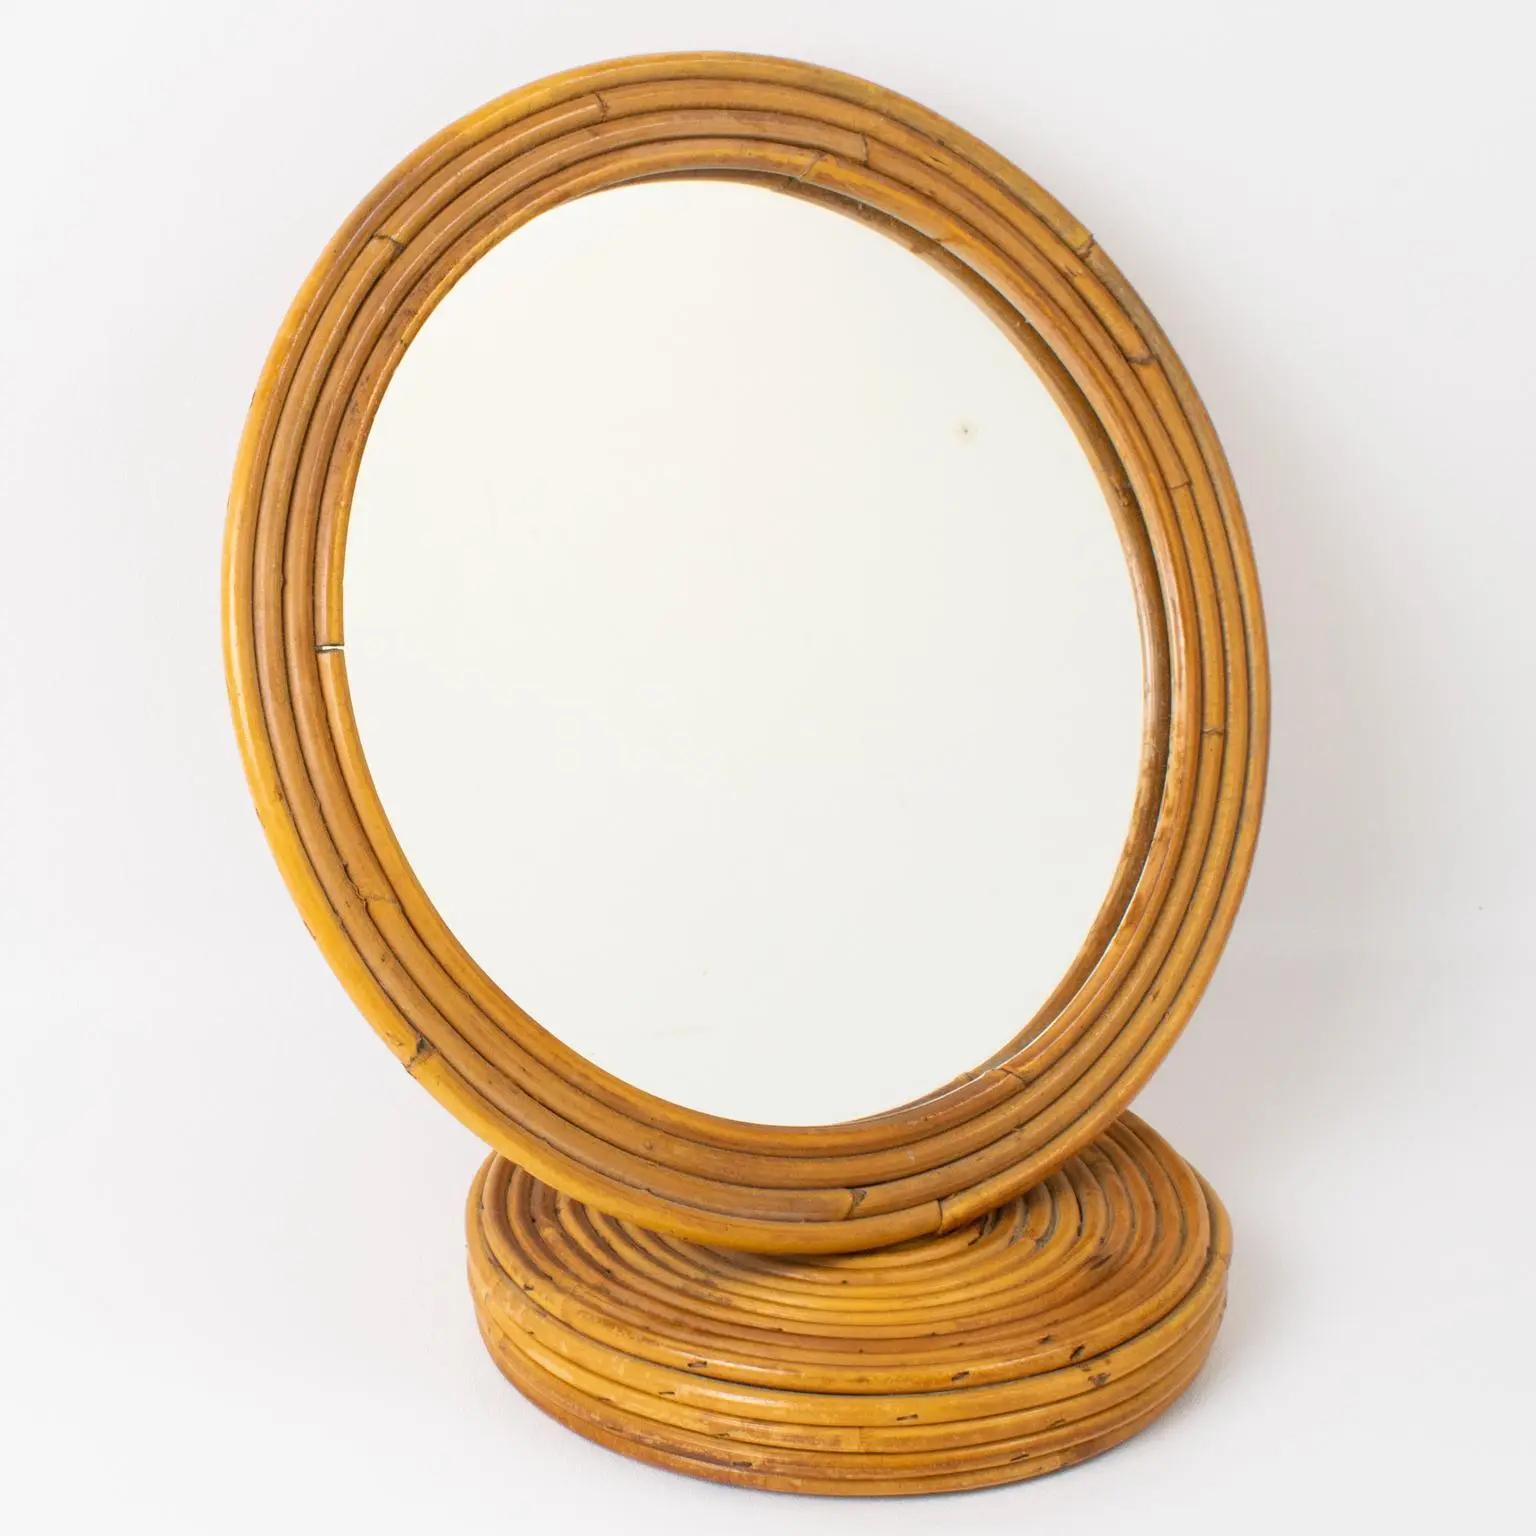 This lovely rattan or bamboo Italian table mirror from the 1960s features a rounded frame built with pencil reed wicker and a mirrored glass insert. There is no visible maker's mark. 
The mirror is in good condition, with minor wear on the mirrored